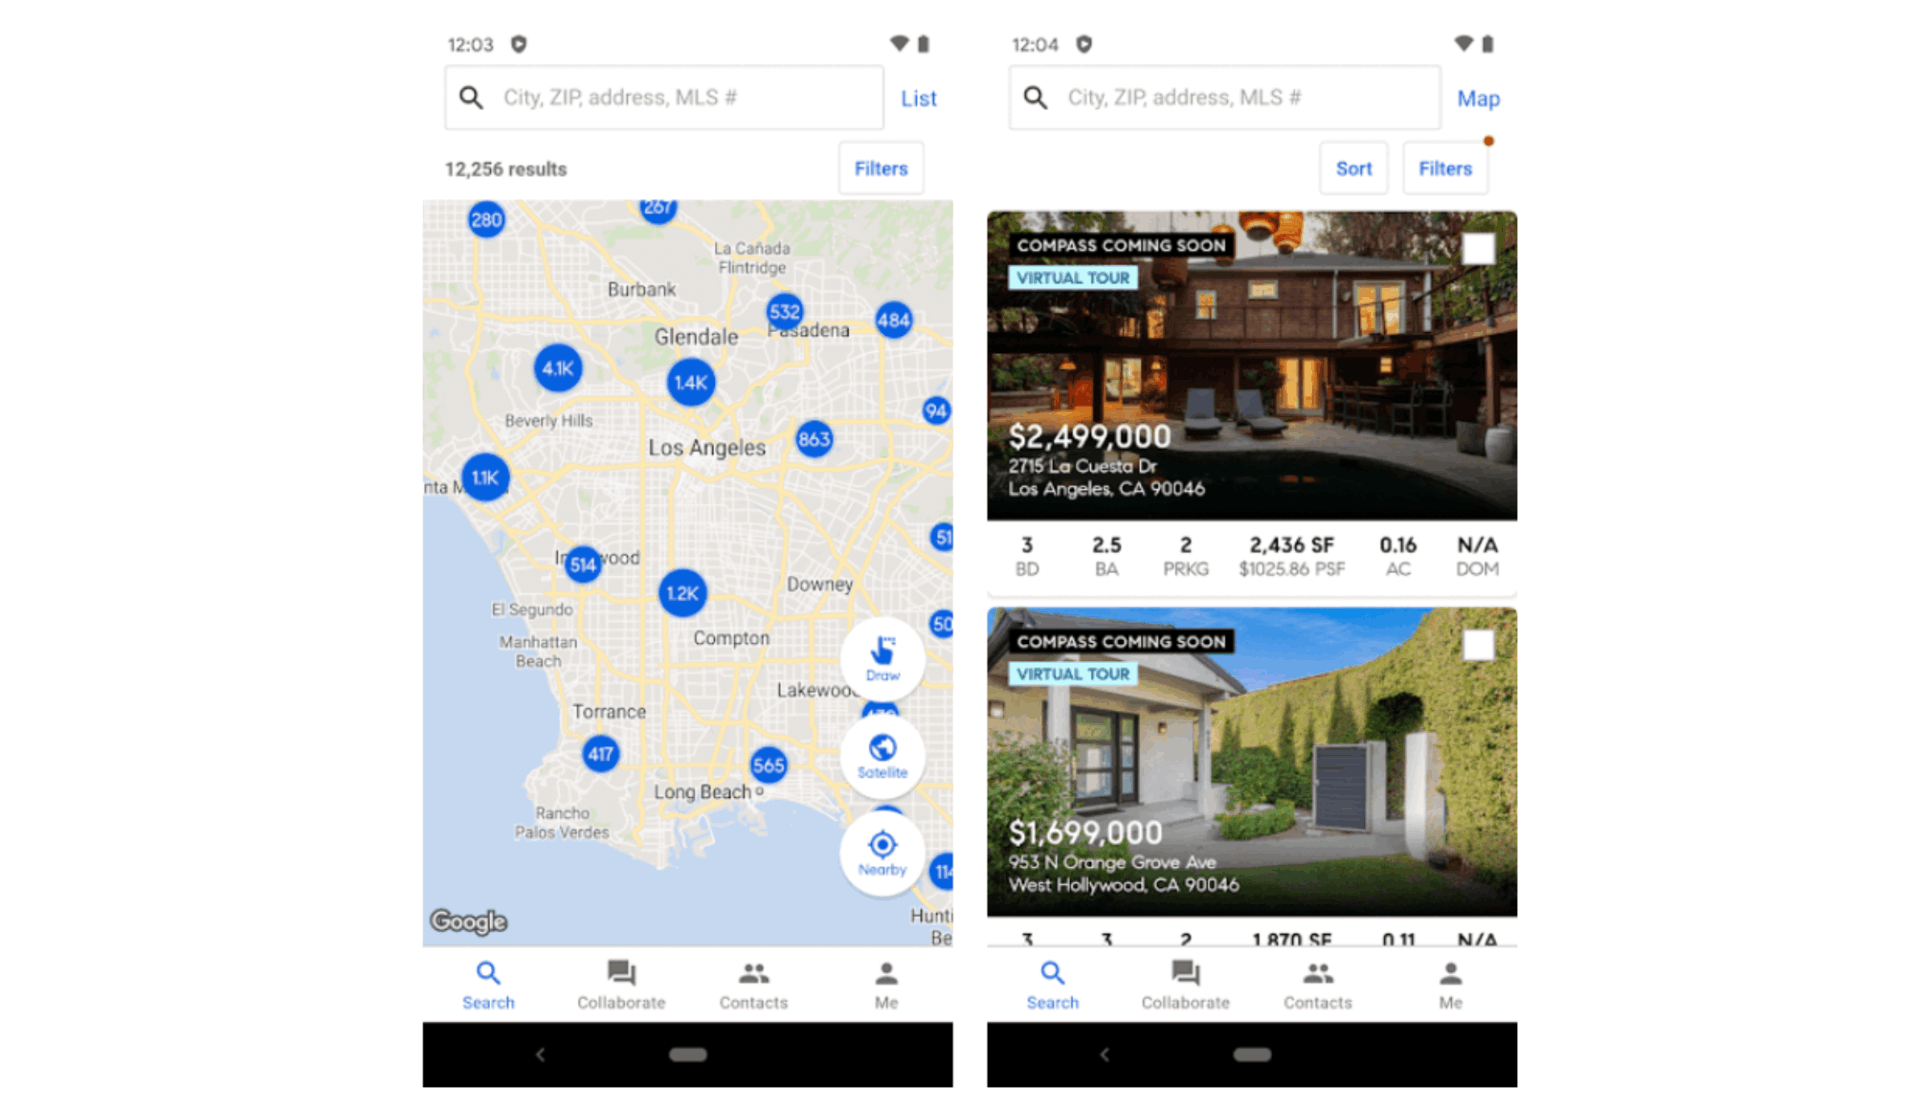 10 Helpful House Hunting Apps - Check Them Out